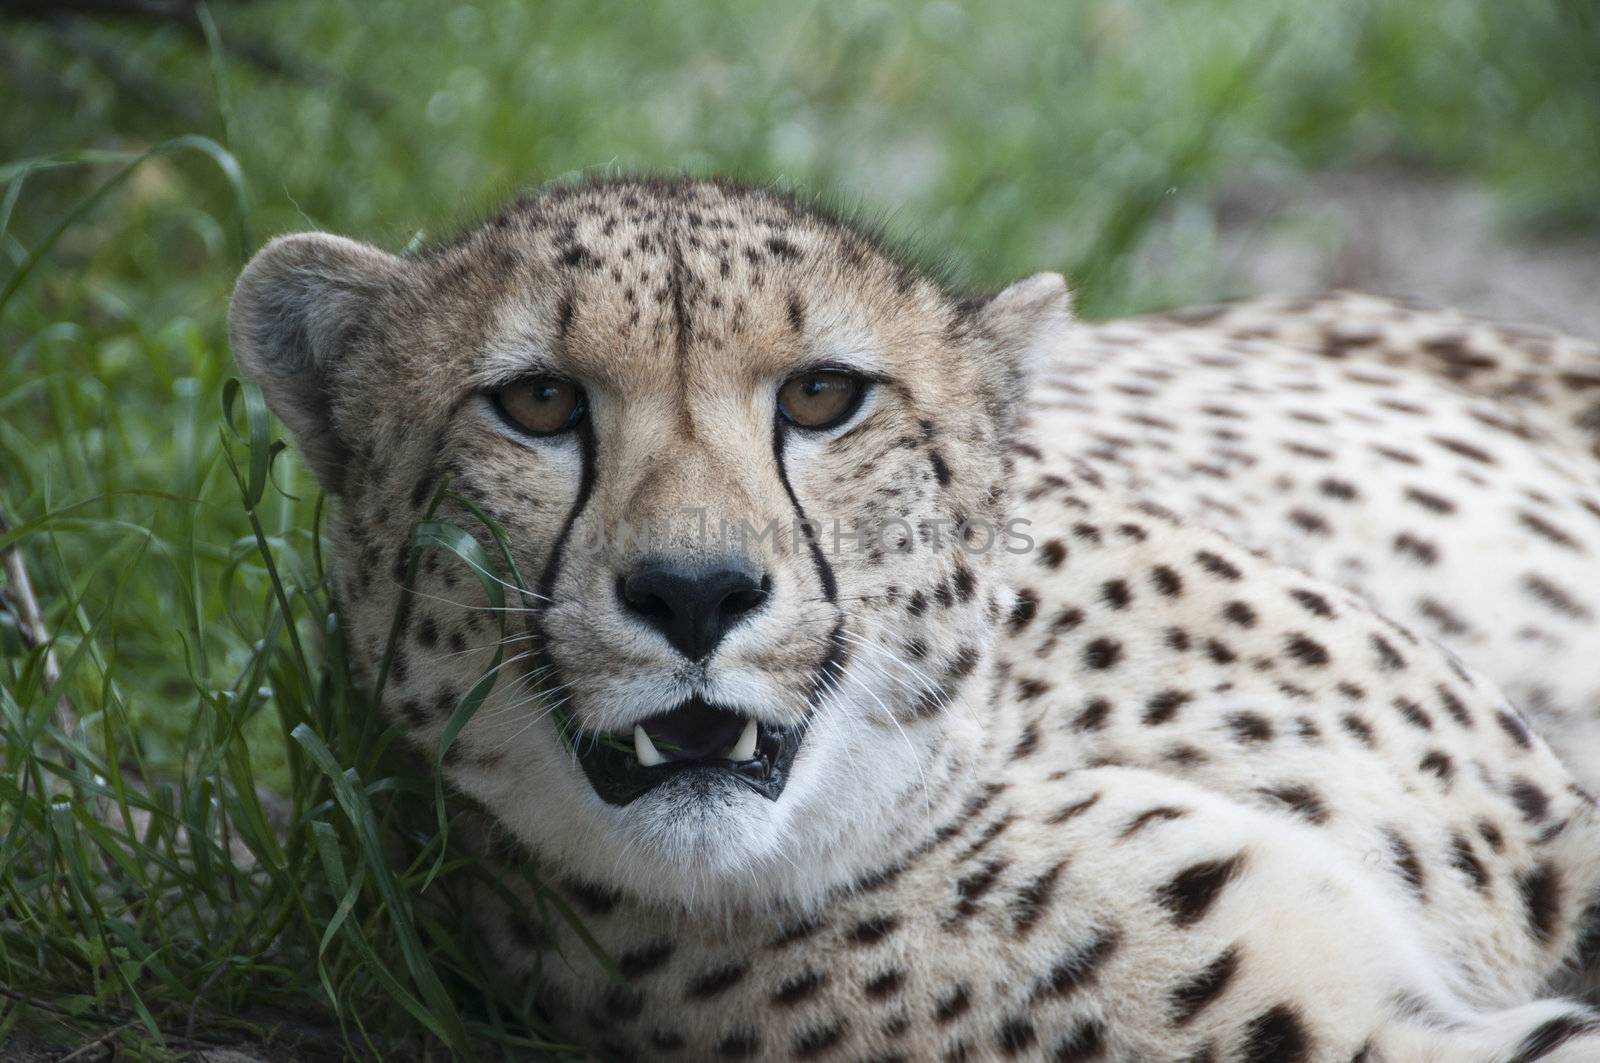 A close up of a cheetah protecting its ground, South Africa